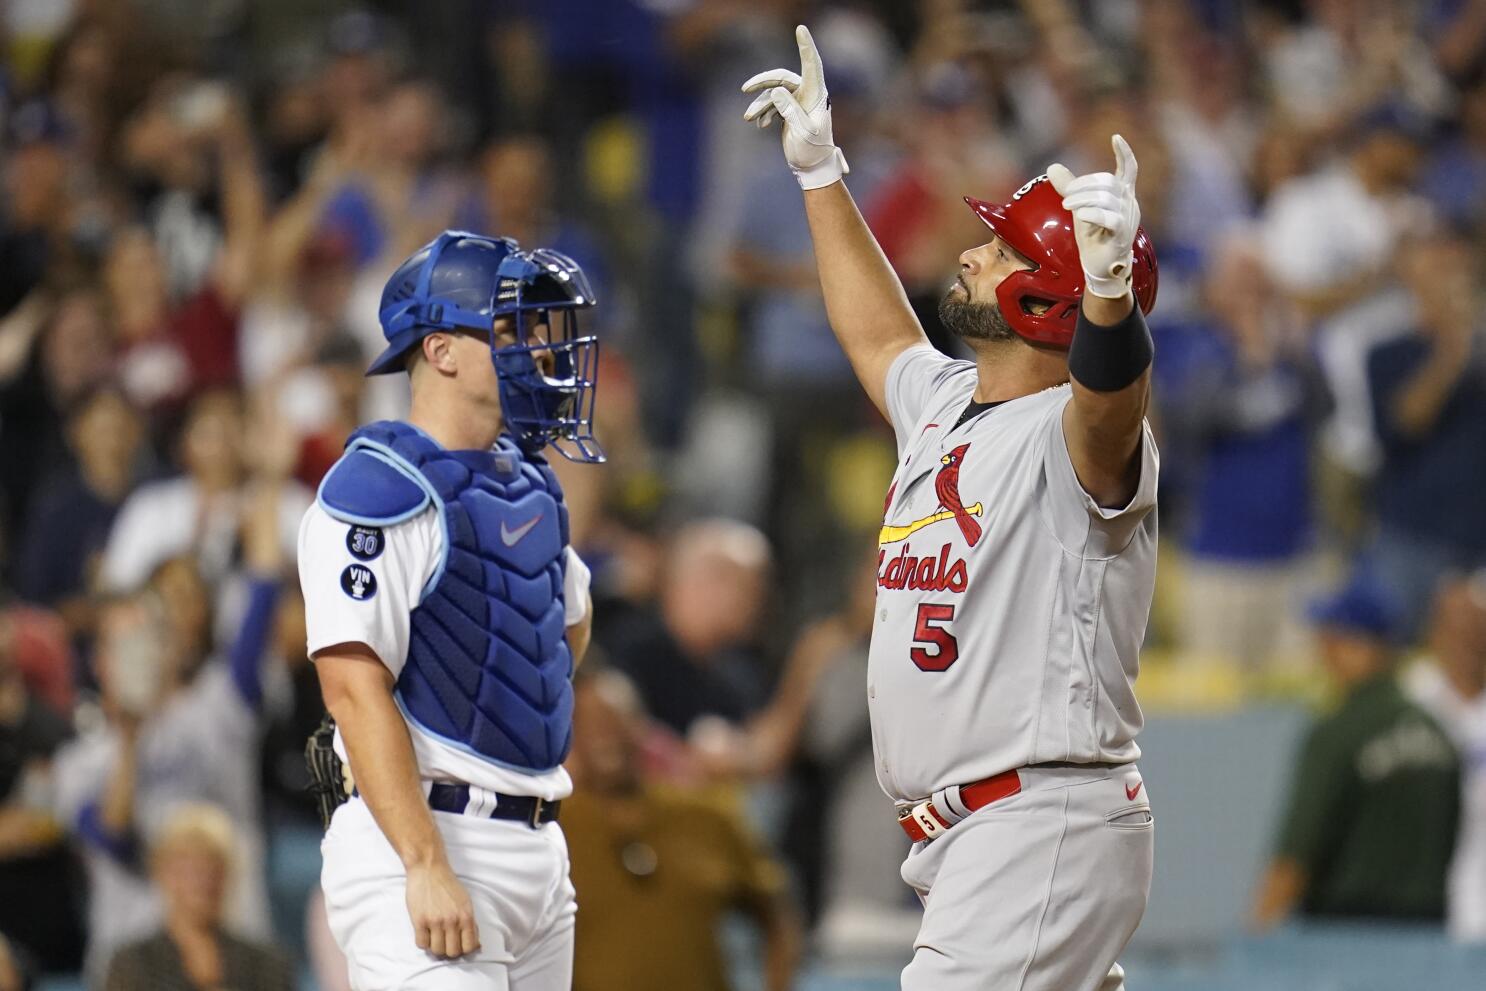 Albert Pujols' quote after 700th HR shows how much Dodgers mean to him